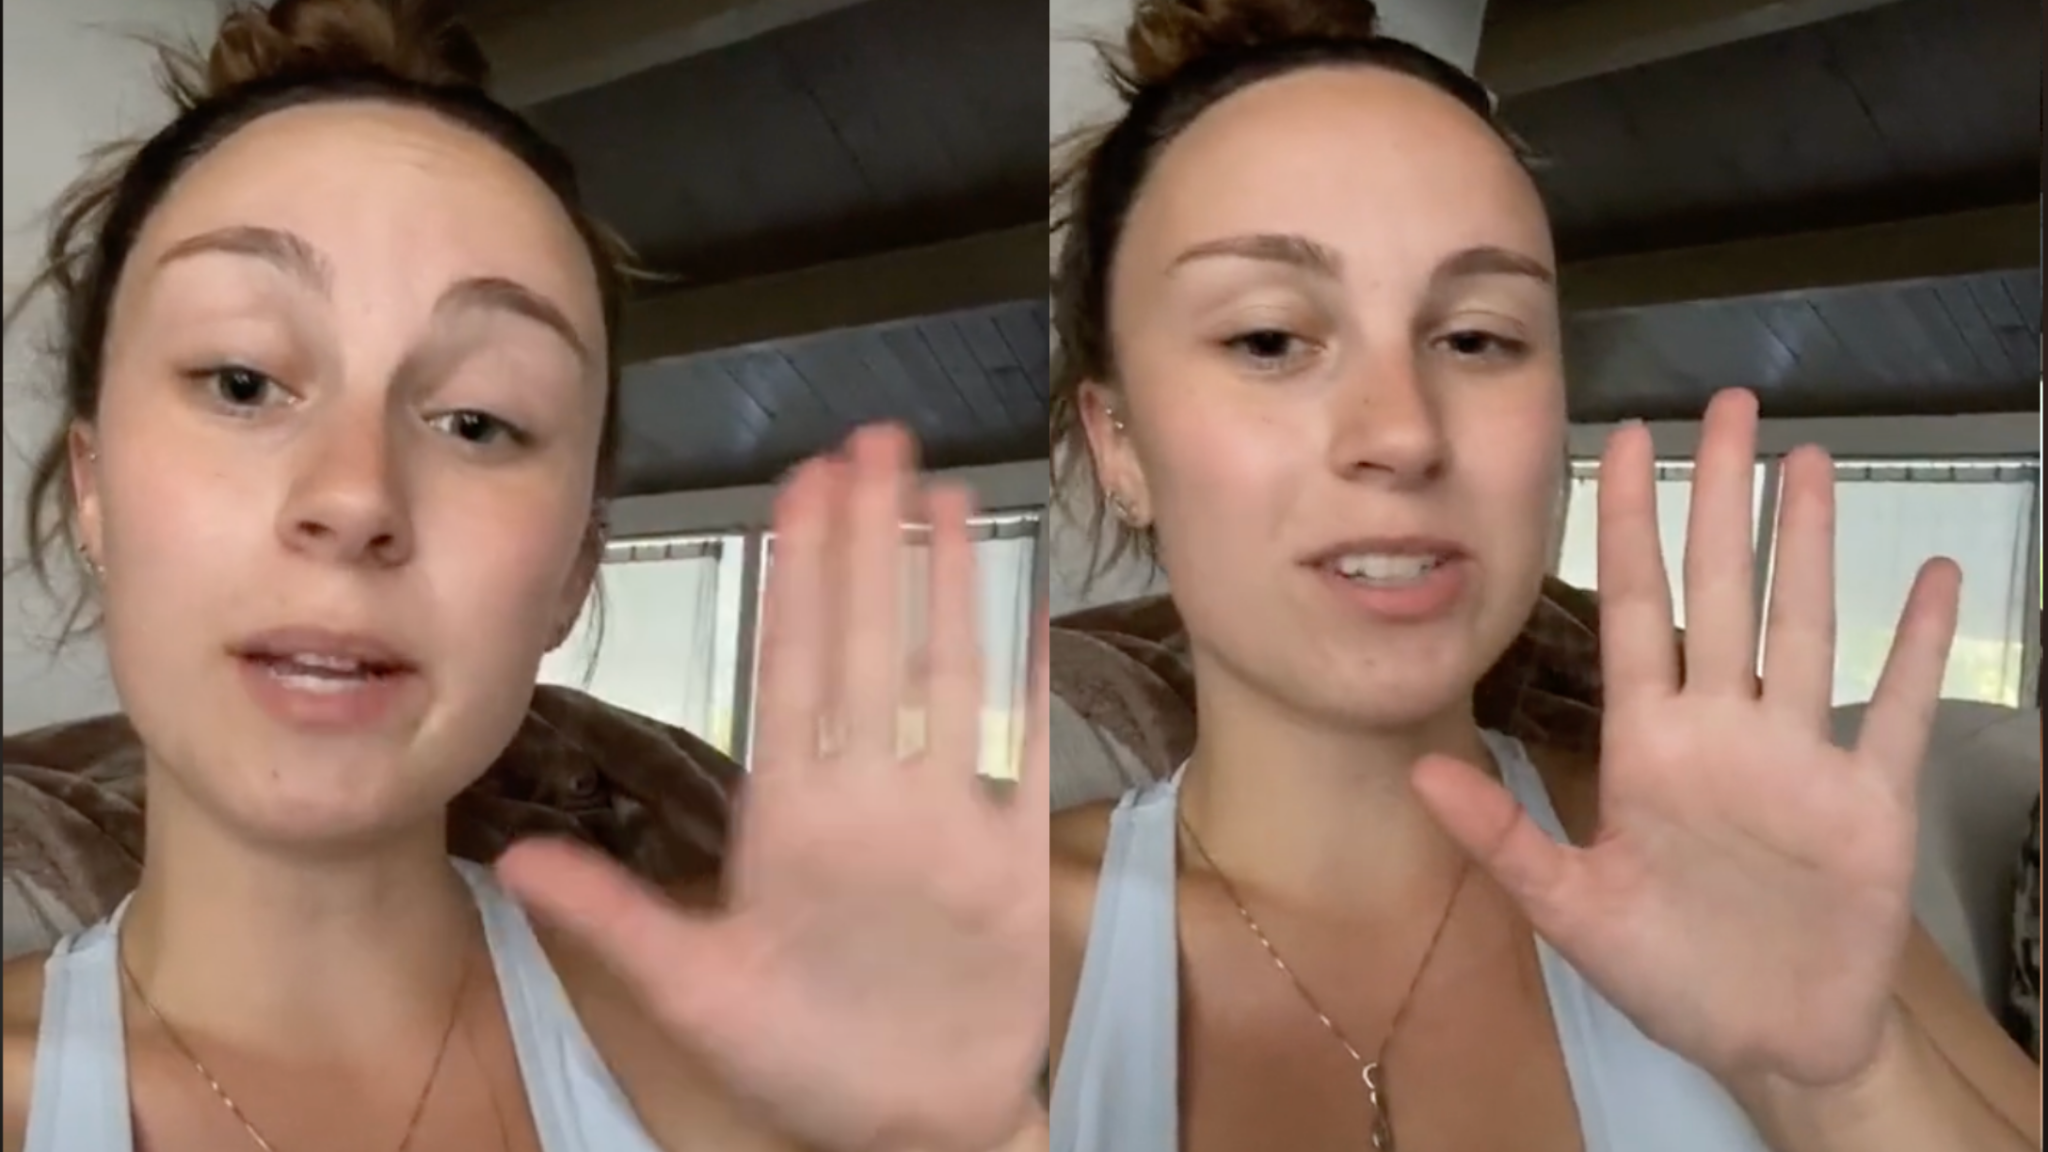 Woman Exposes Toxic In-Laws’ Bad Behavior on TikTok & They Retaliate by Trying To Ruin Her